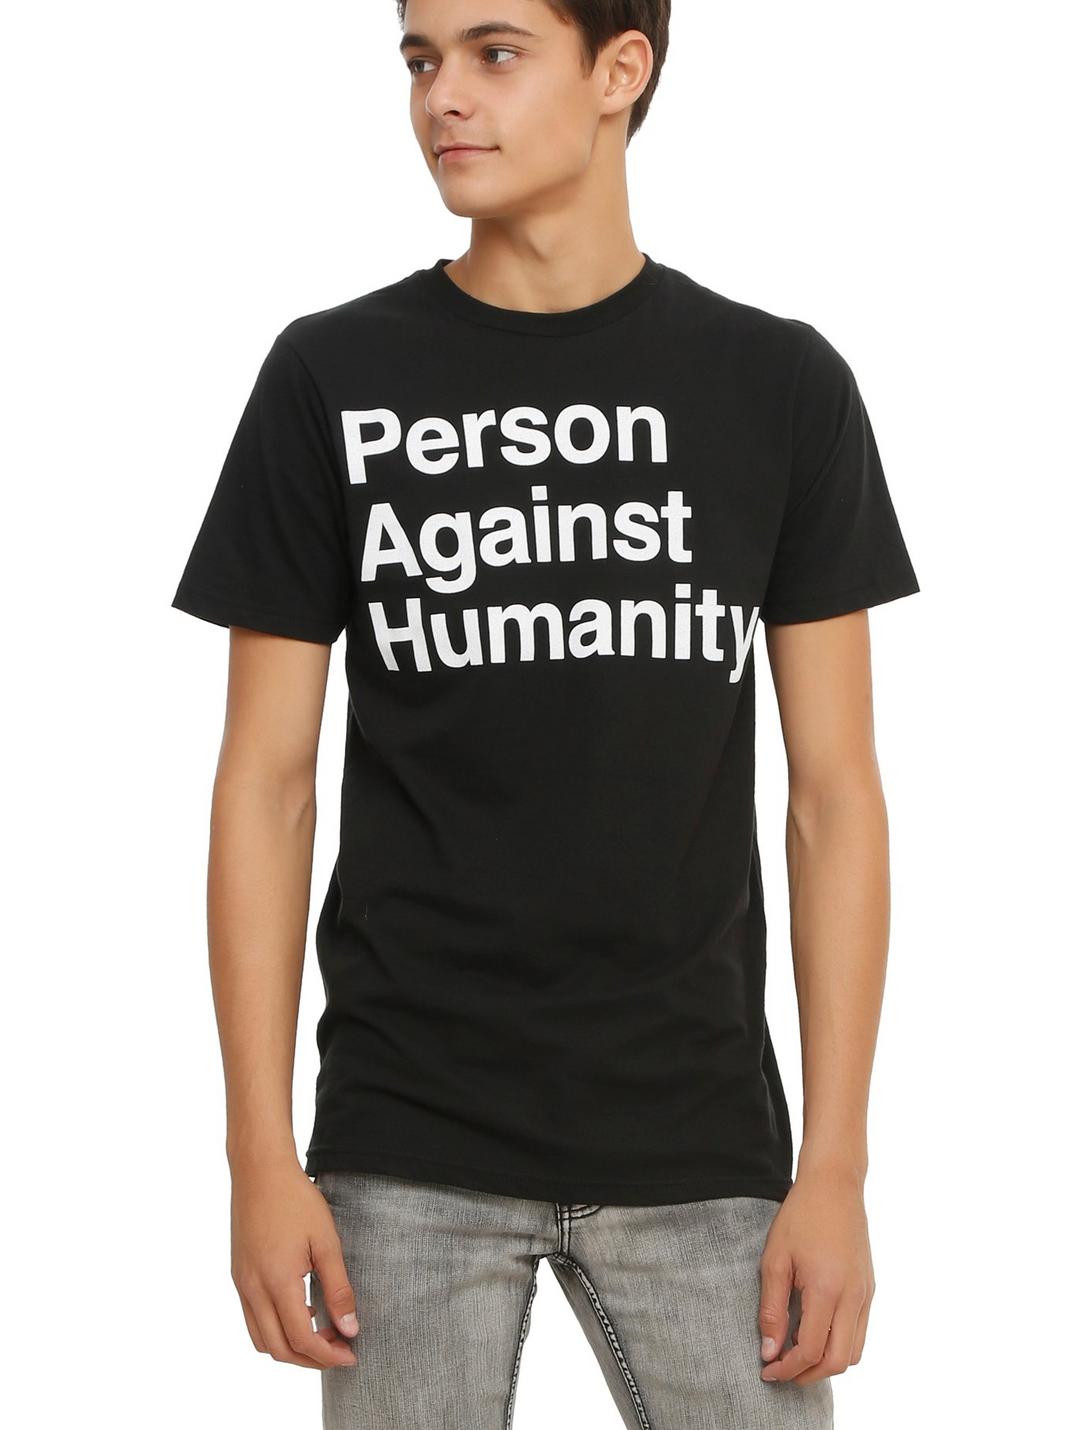 Person Against Humanity T-Shirt, BLACK, hi-res